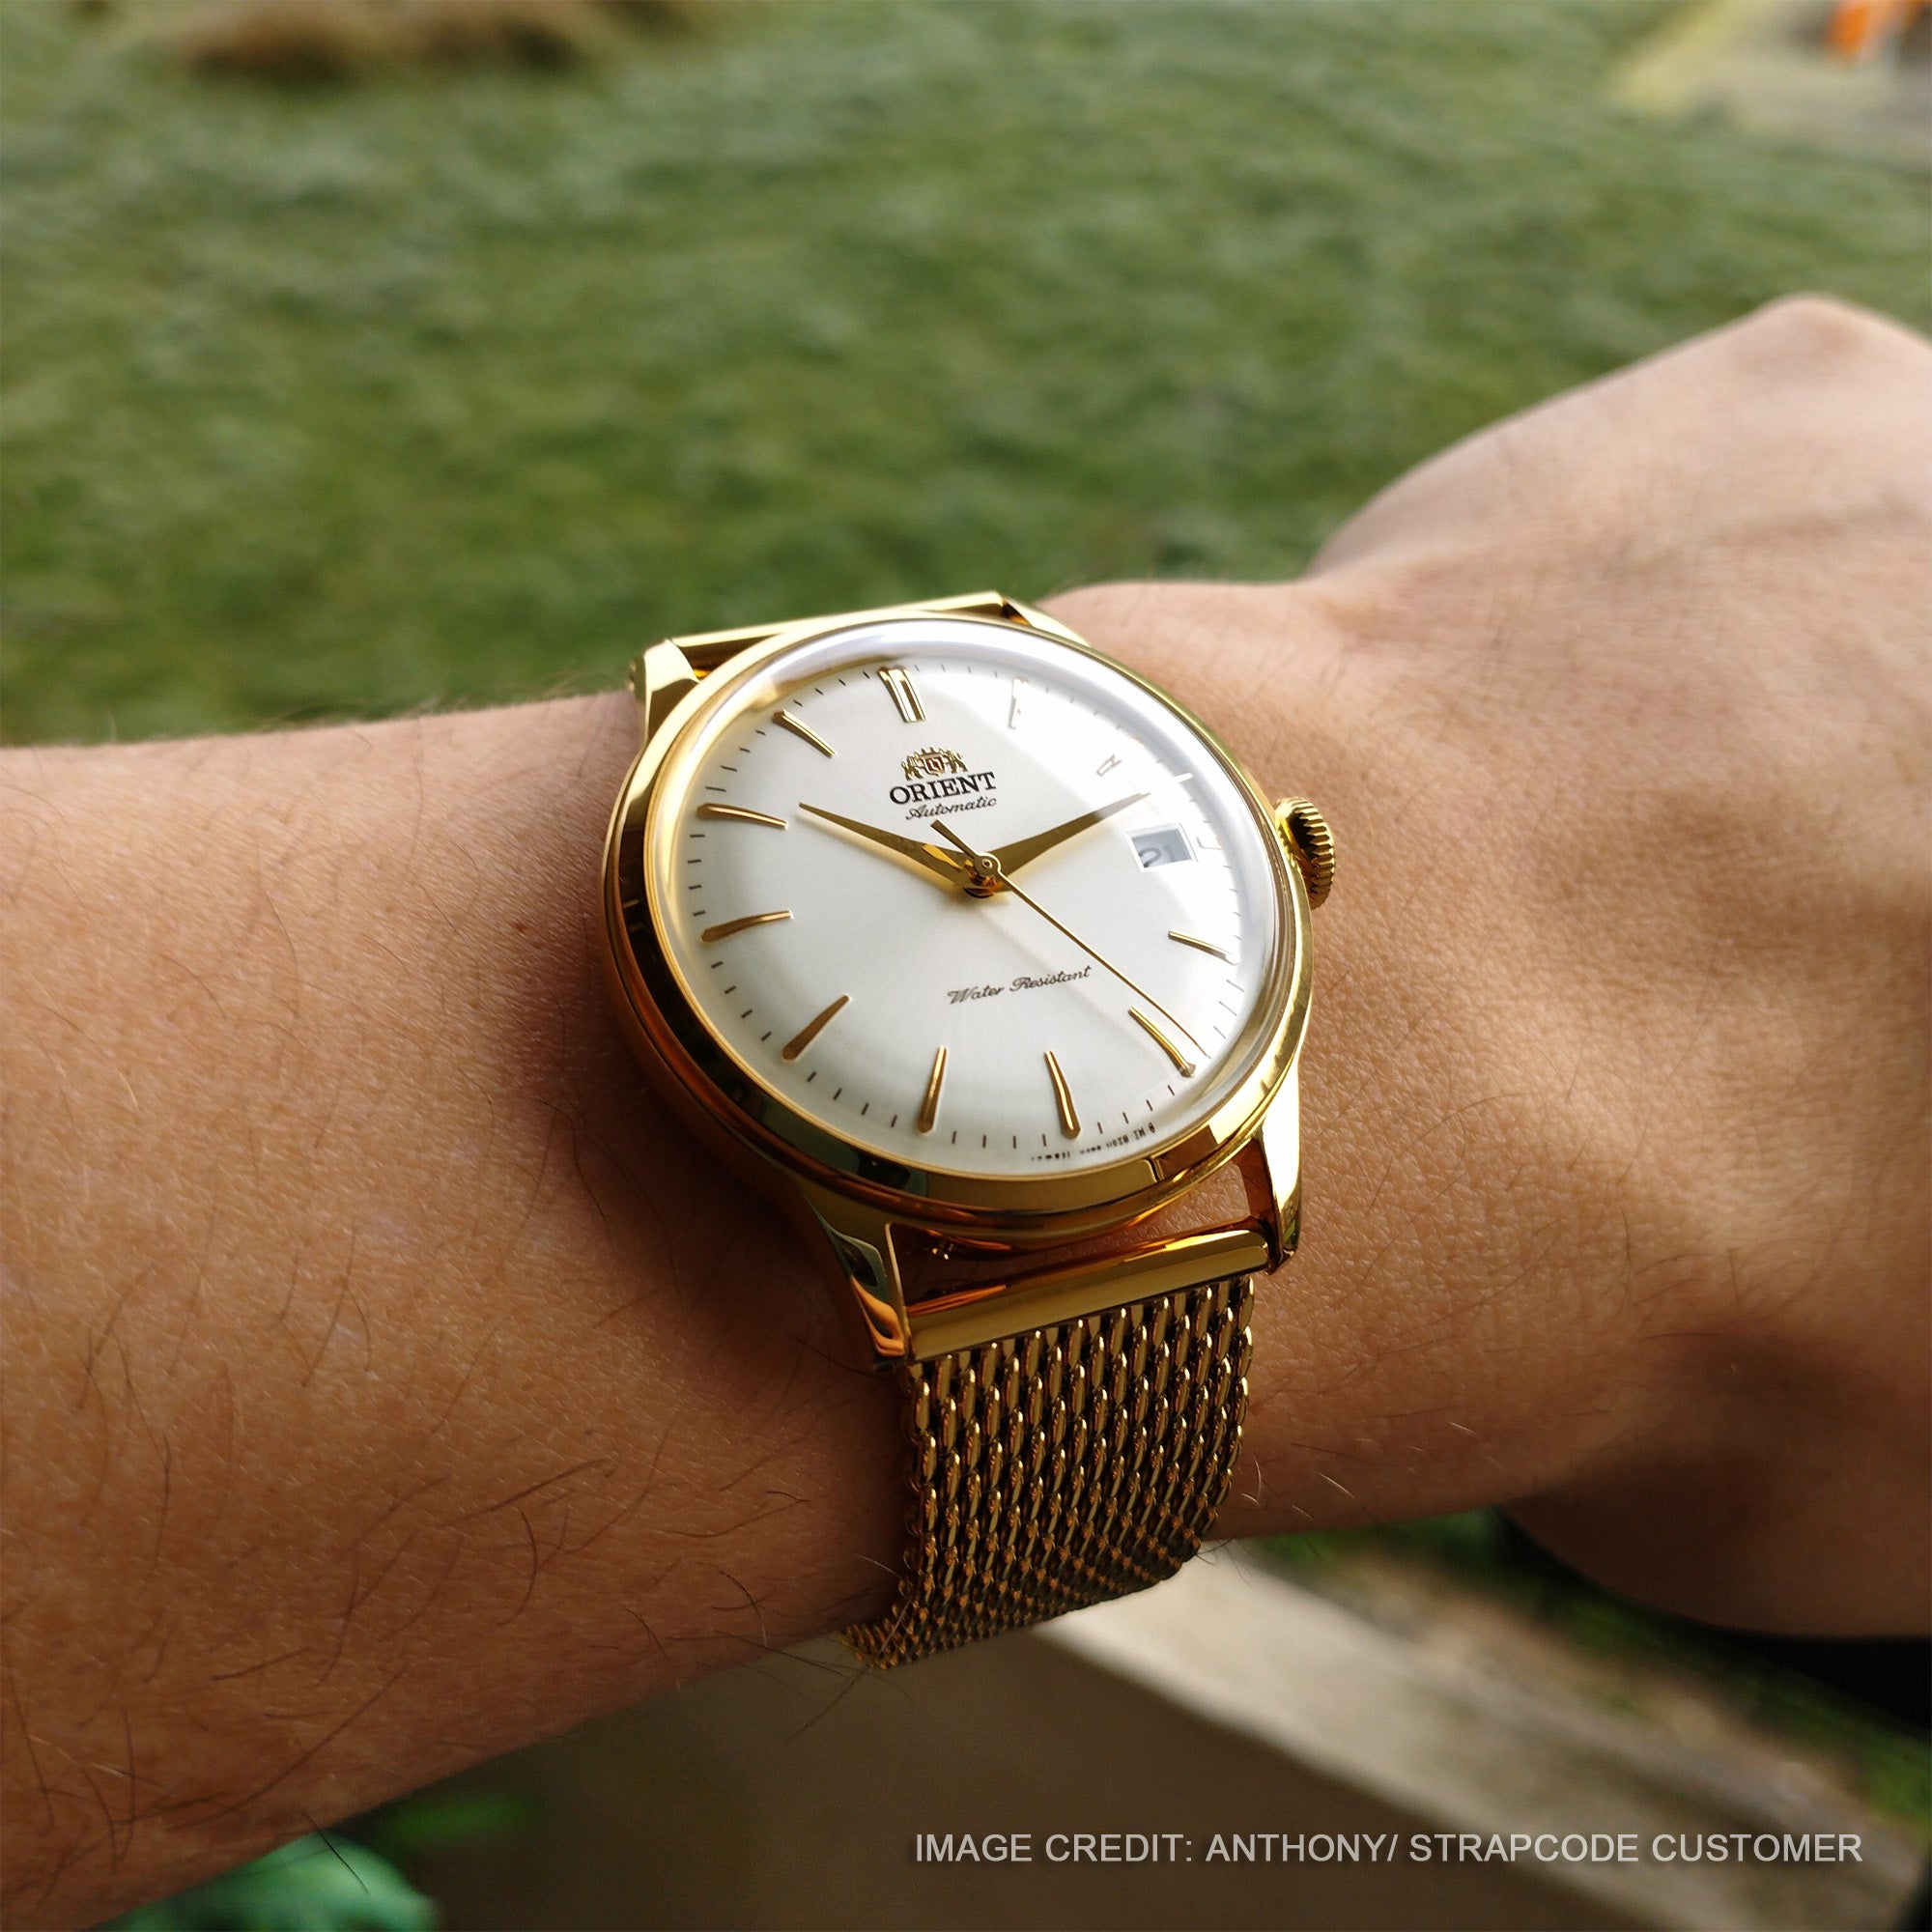 The Orient Bambino 38mm watch completmented by gold quick release tapered Milanese mesh watch band by Strapcode